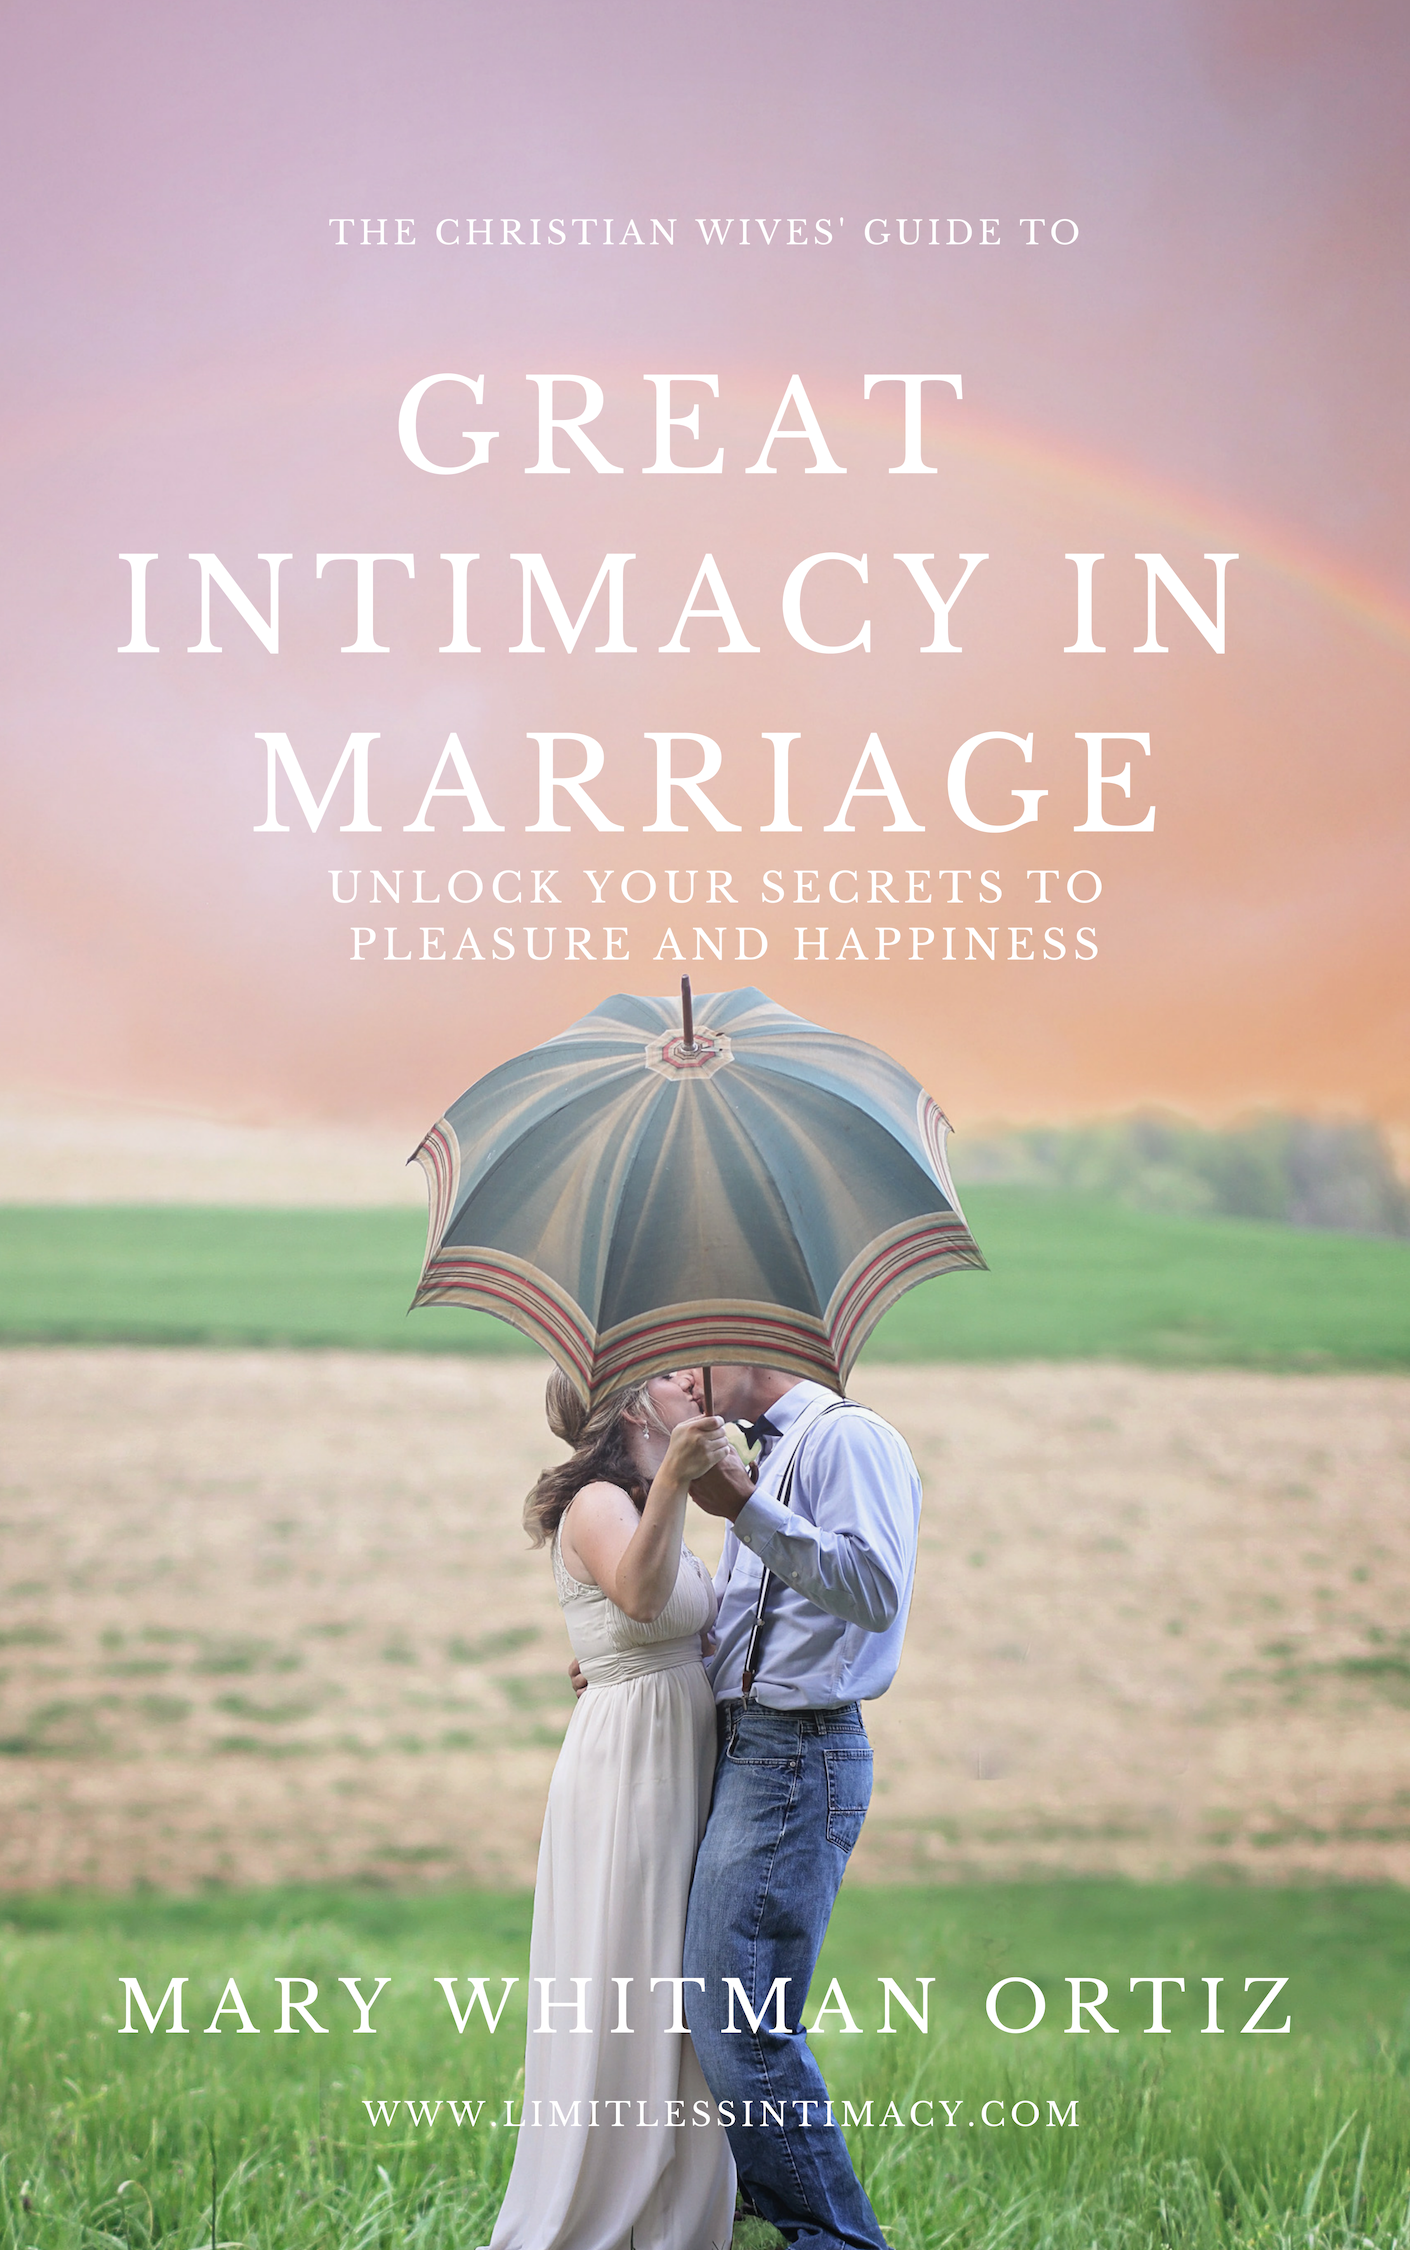 The Christian Wives’ Guide to Great Intimacy in Marriage: - Unlock Your Secrets to Pleasure and HappinessEbook & Private Coaching Programs